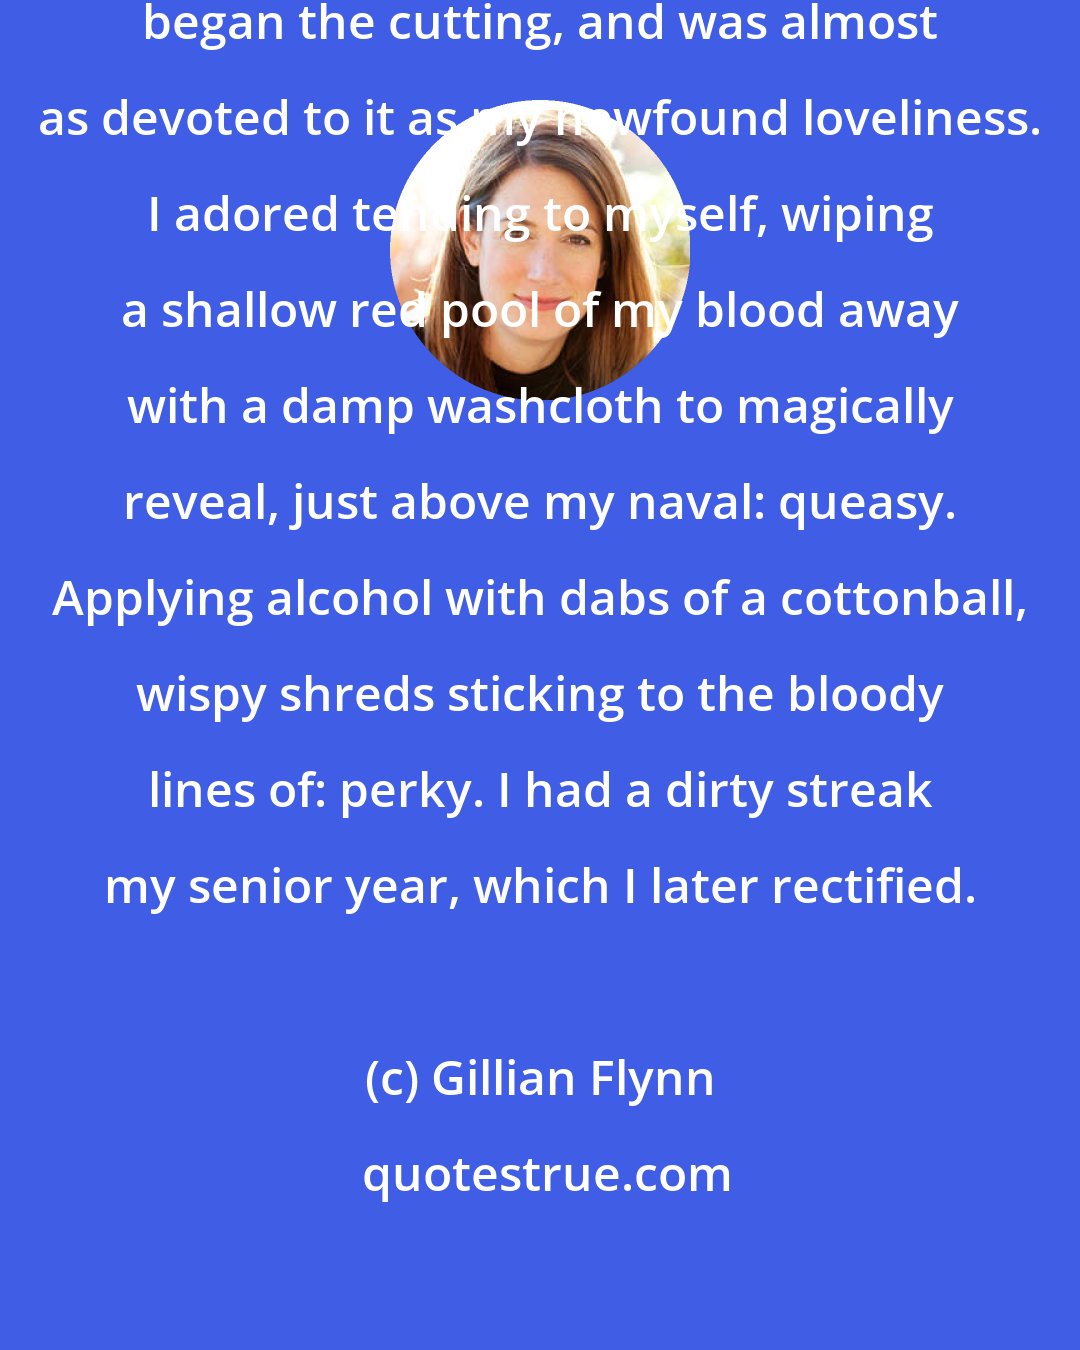 Gillian Flynn: It was that summer, too, that I began the cutting, and was almost as devoted to it as my newfound loveliness. I adored tending to myself, wiping a shallow red pool of my blood away with a damp washcloth to magically reveal, just above my naval: queasy. Applying alcohol with dabs of a cottonball, wispy shreds sticking to the bloody lines of: perky. I had a dirty streak my senior year, which I later rectified.